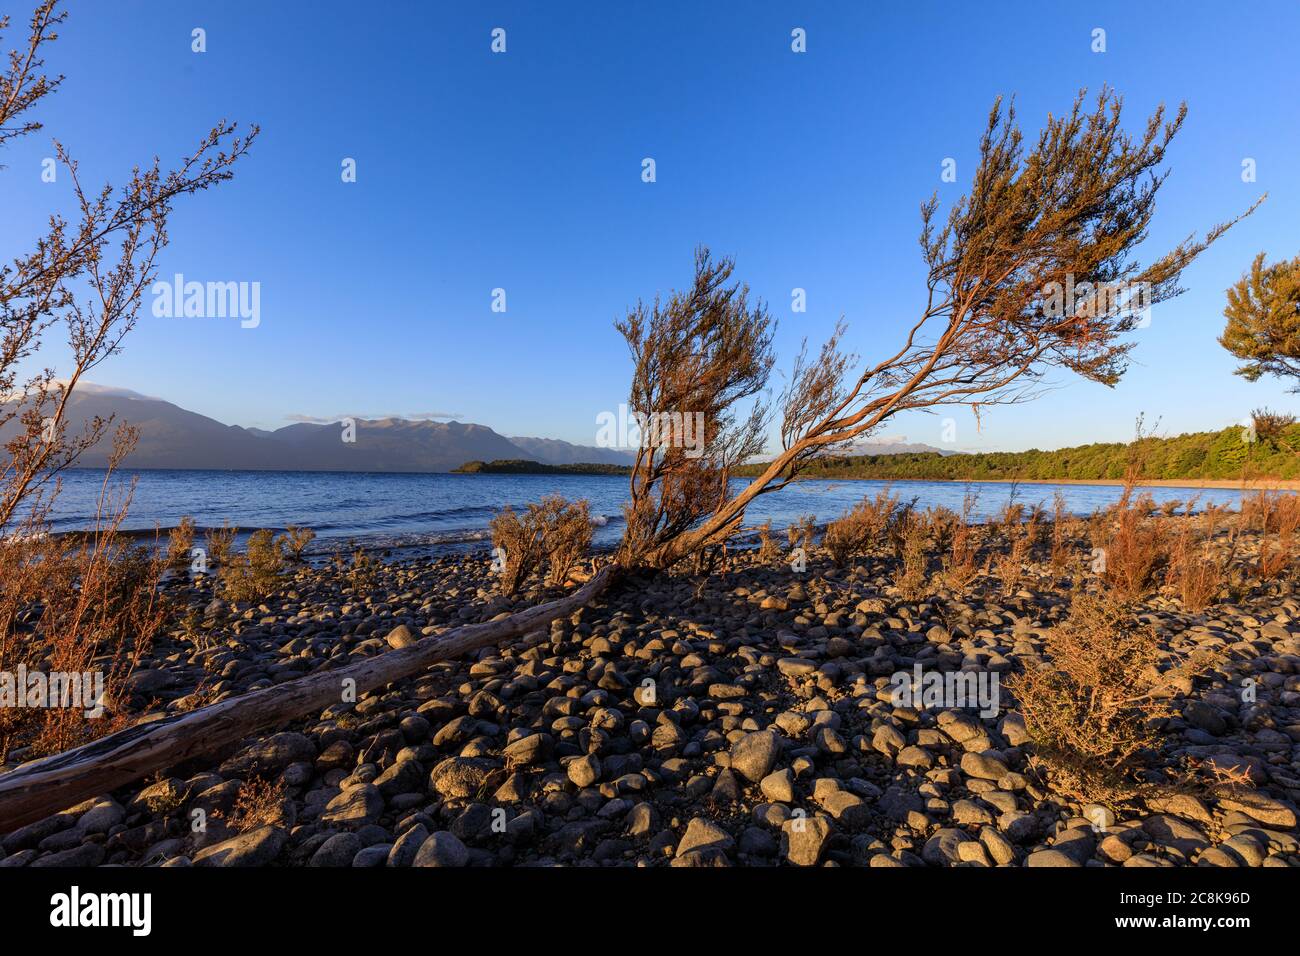 Shrubs clinging to the rocky shore of Lake Te Anau at Department of Conservation, DOC, Henry Creek Campsite under a blue sky. Stock Photo